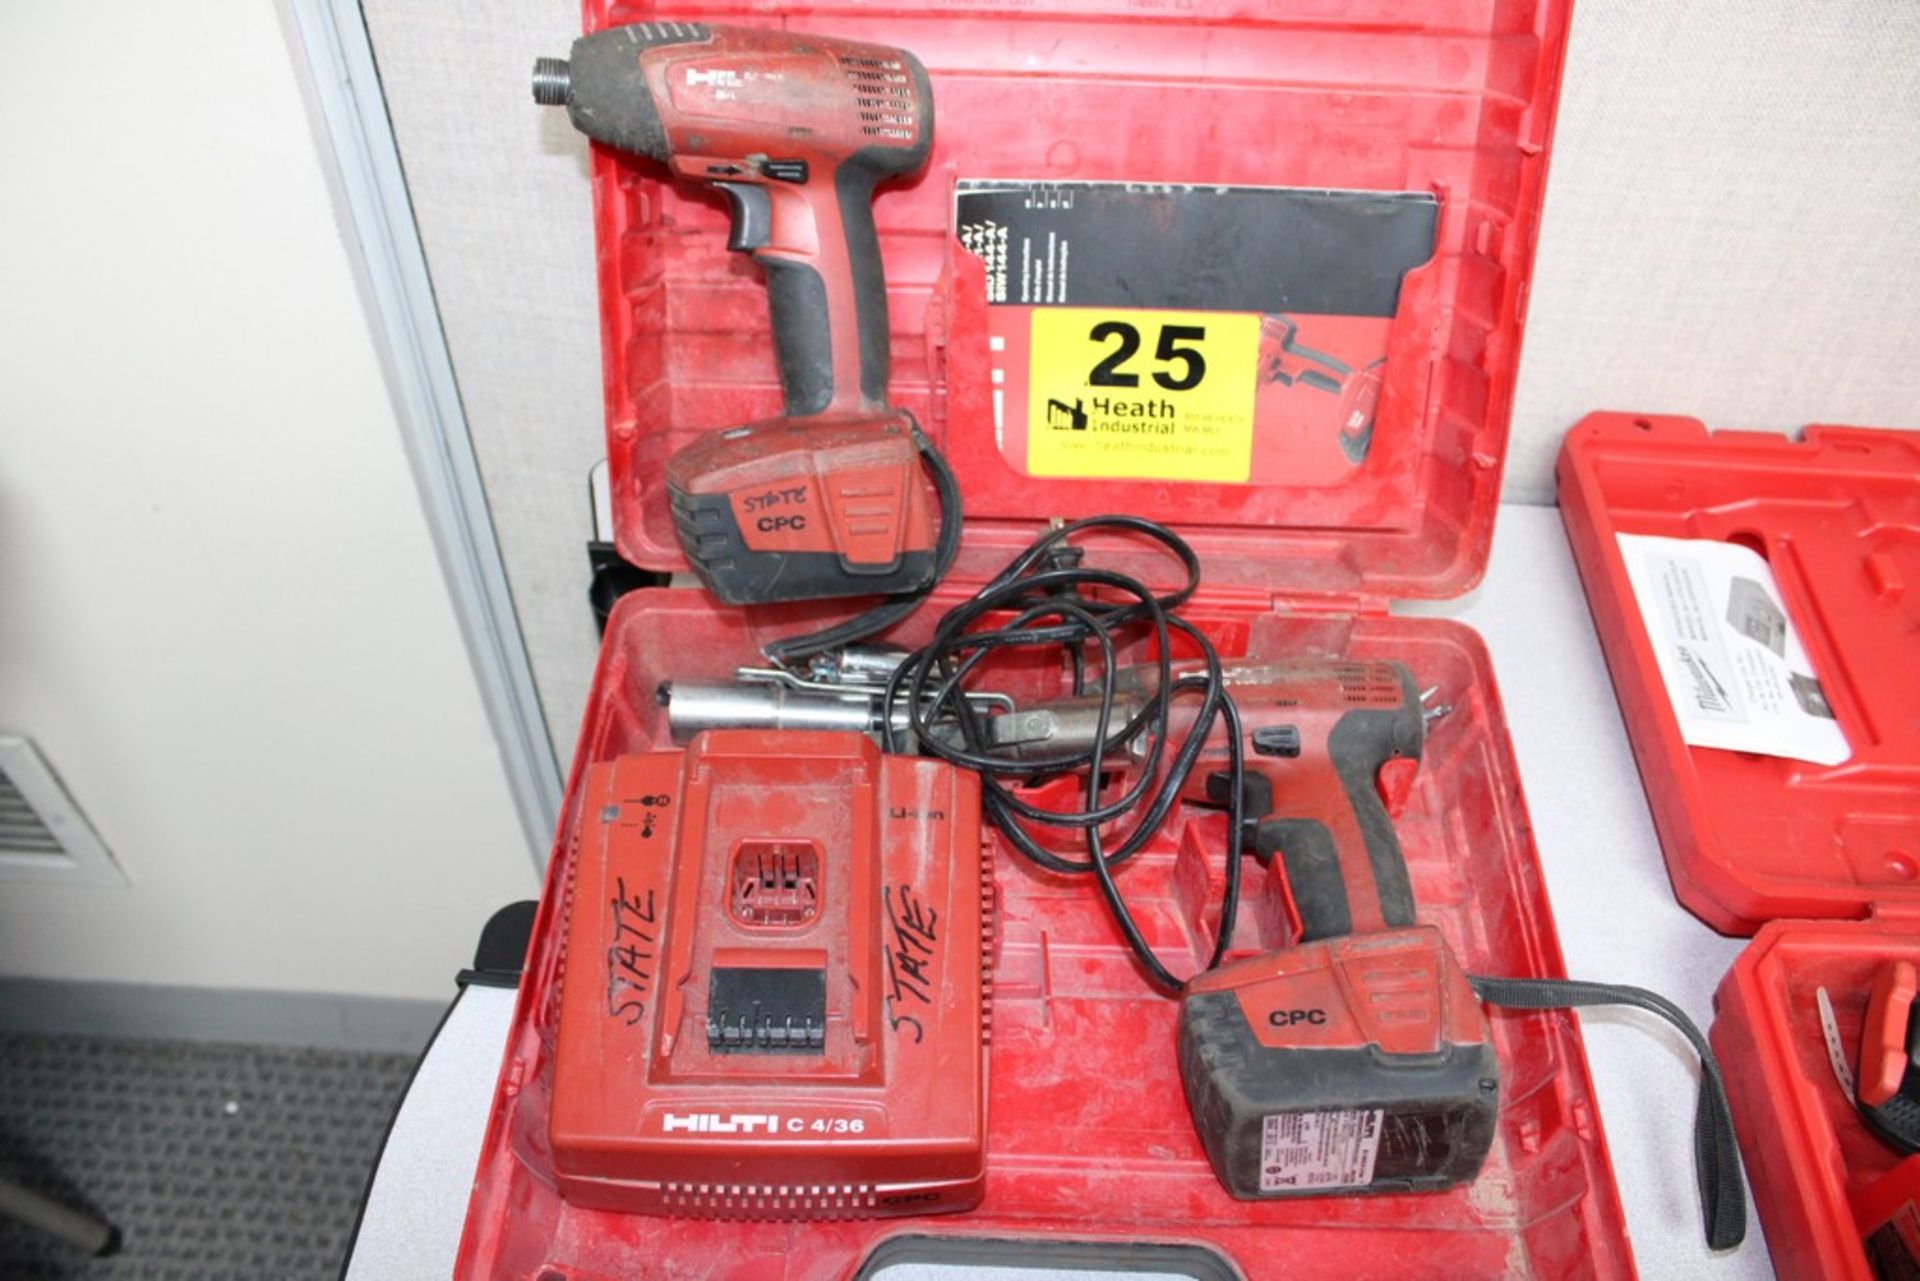 (2) HILTI MODEL SID144 14.4 V IMPACT DRIVERS, WITH (2) BATTERIES, CHARGER, CASE